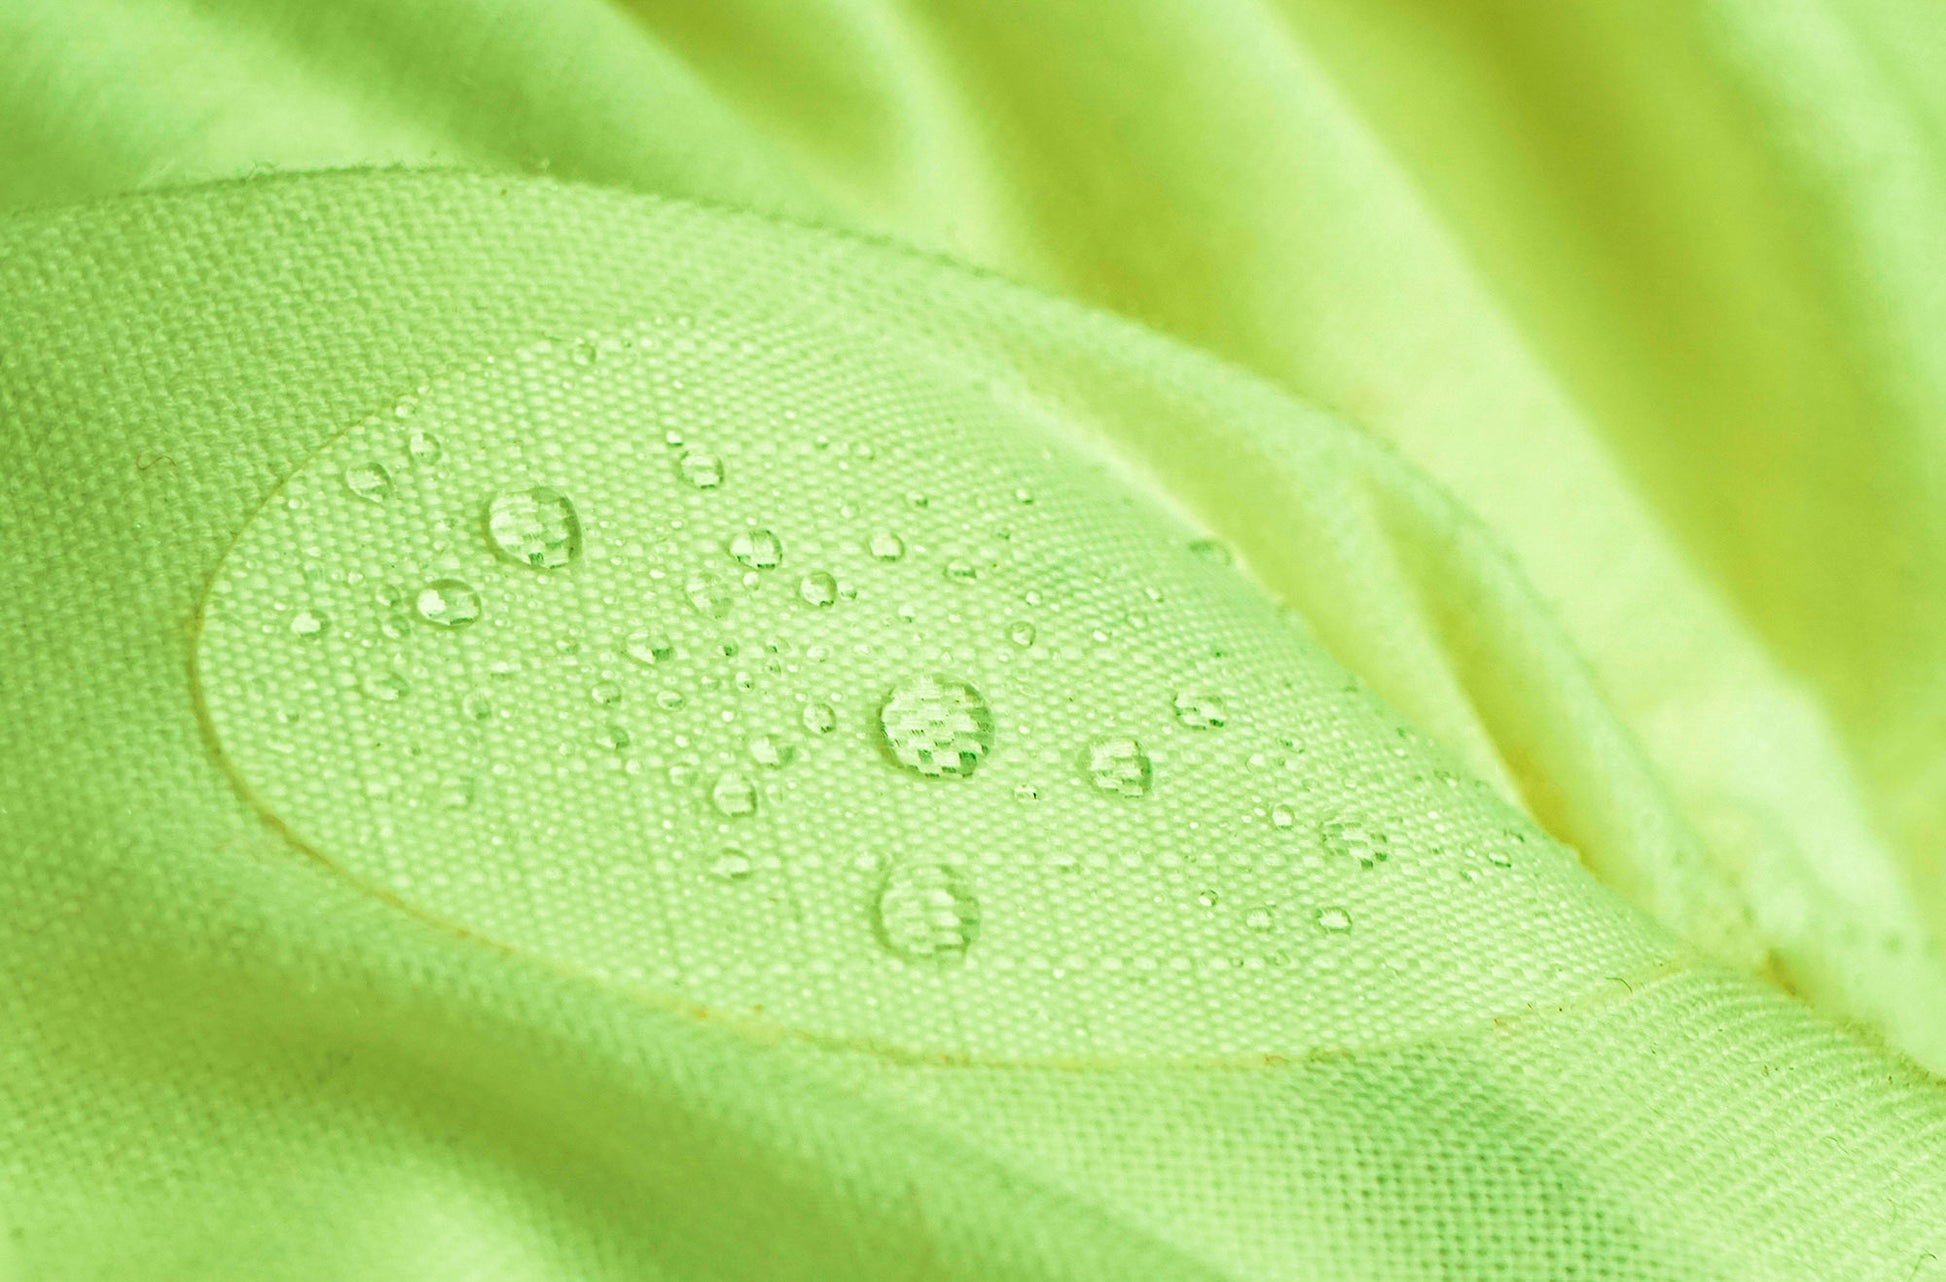 Green Down Jacket Repair Patches - Self Adhesive Clothing Nylon Patch Waterproof (Neon Green)